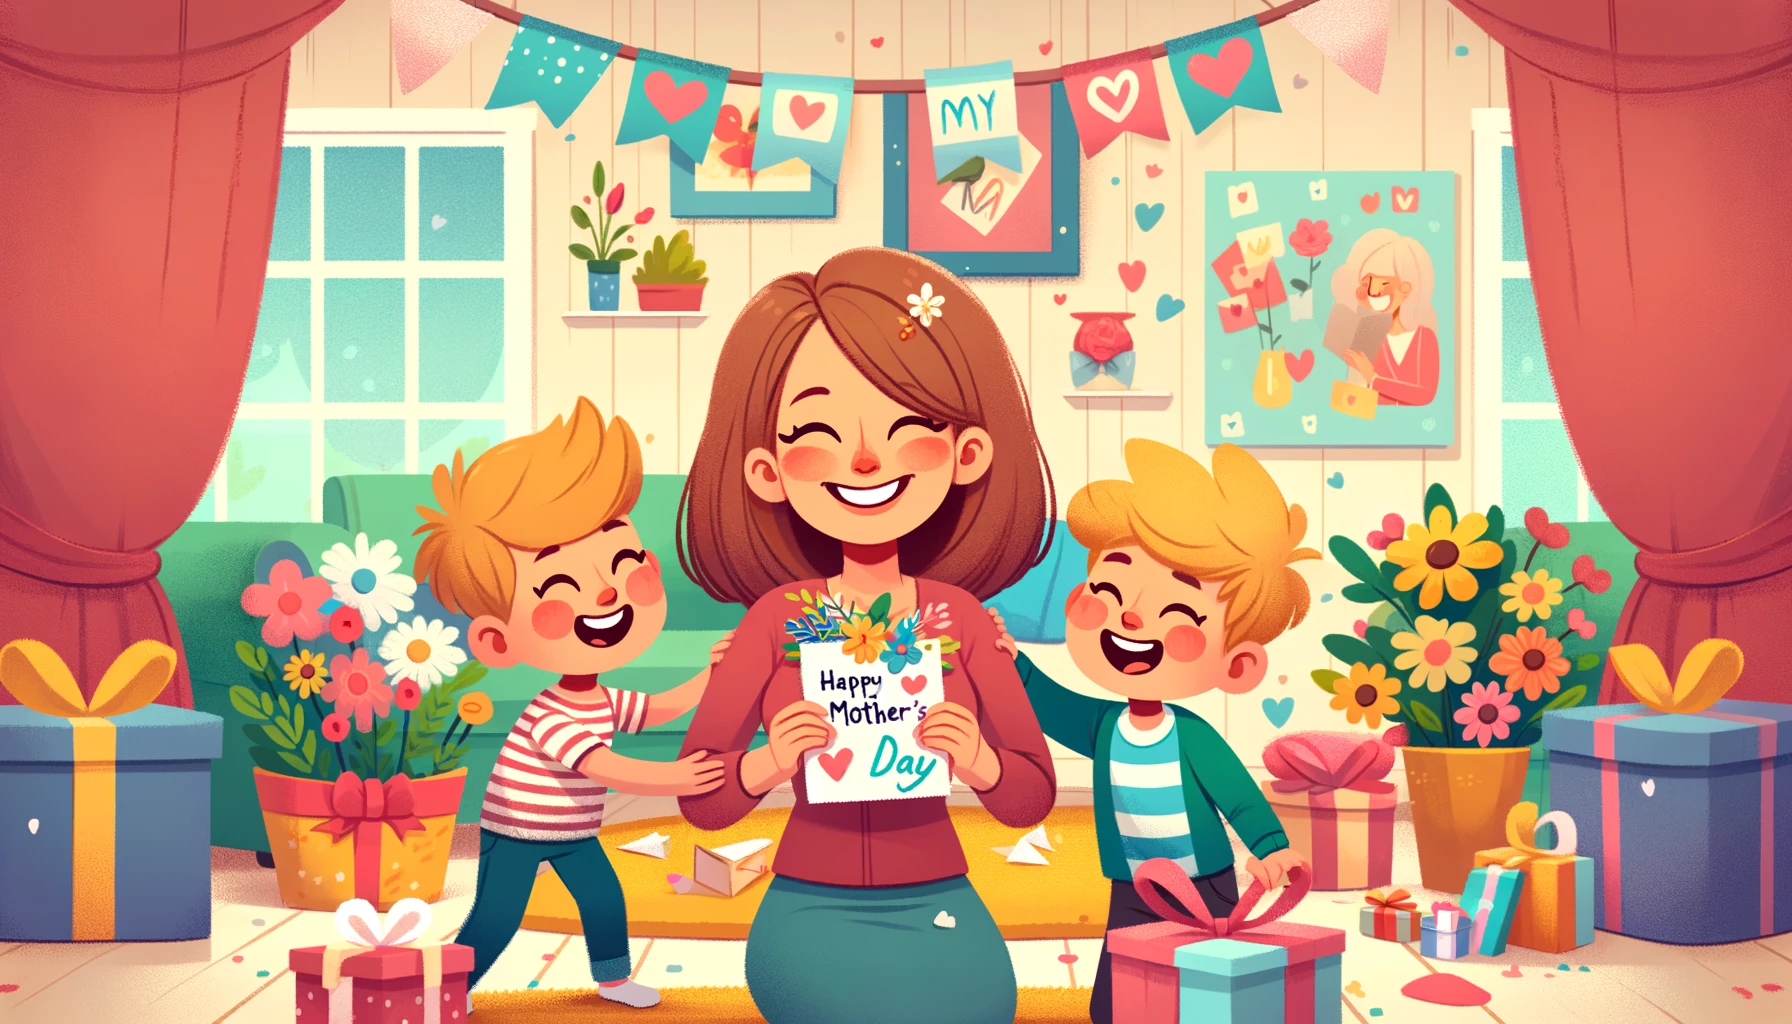  A cartoon-style image celebrating Mother's Day. The scene includes a smiling mother surrounded by her happy children, in a cozy living room with colourful decorations and flowers.  